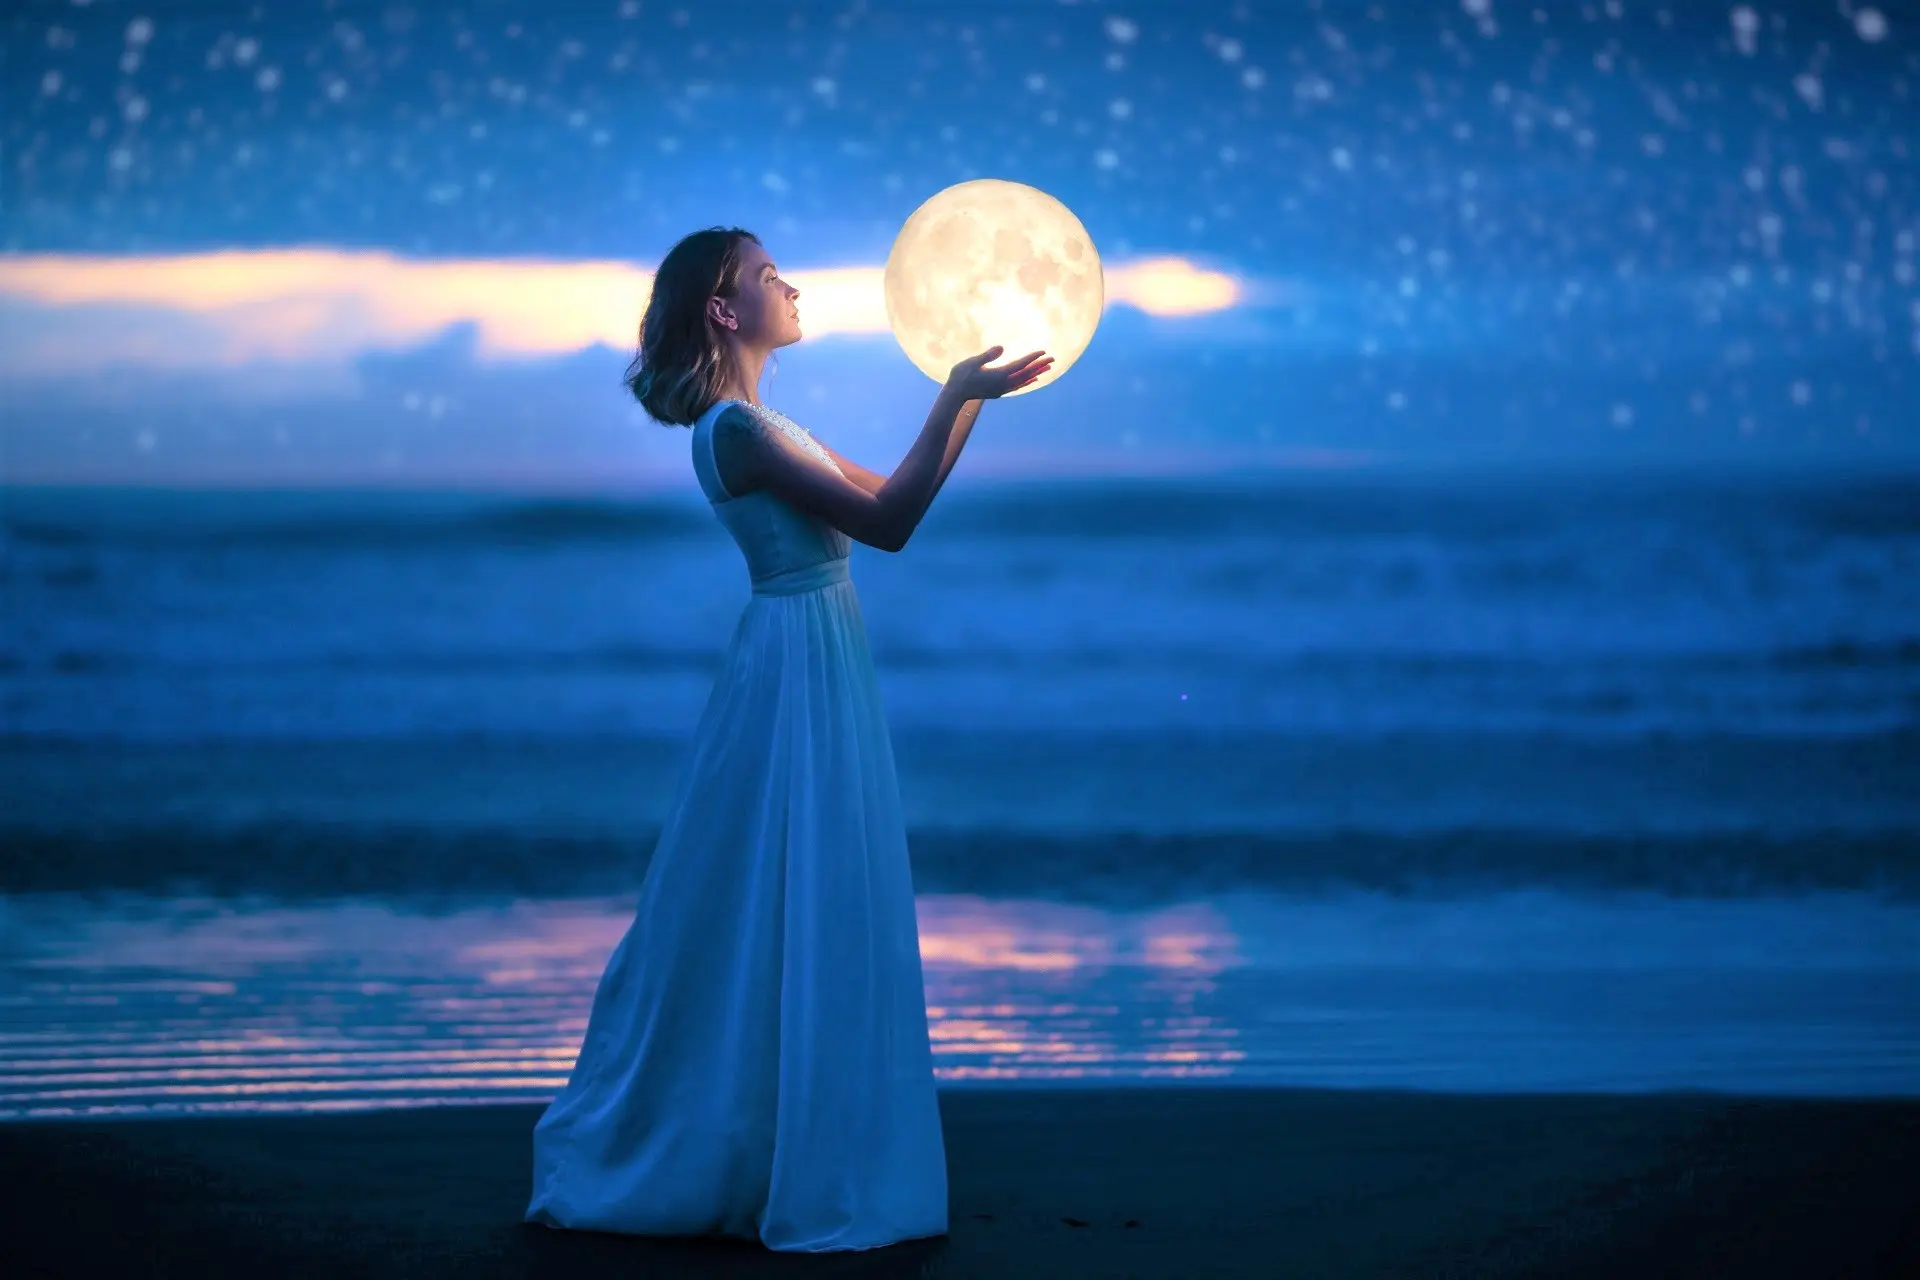 A young girl on a night beach holds the moon, with a starry sky